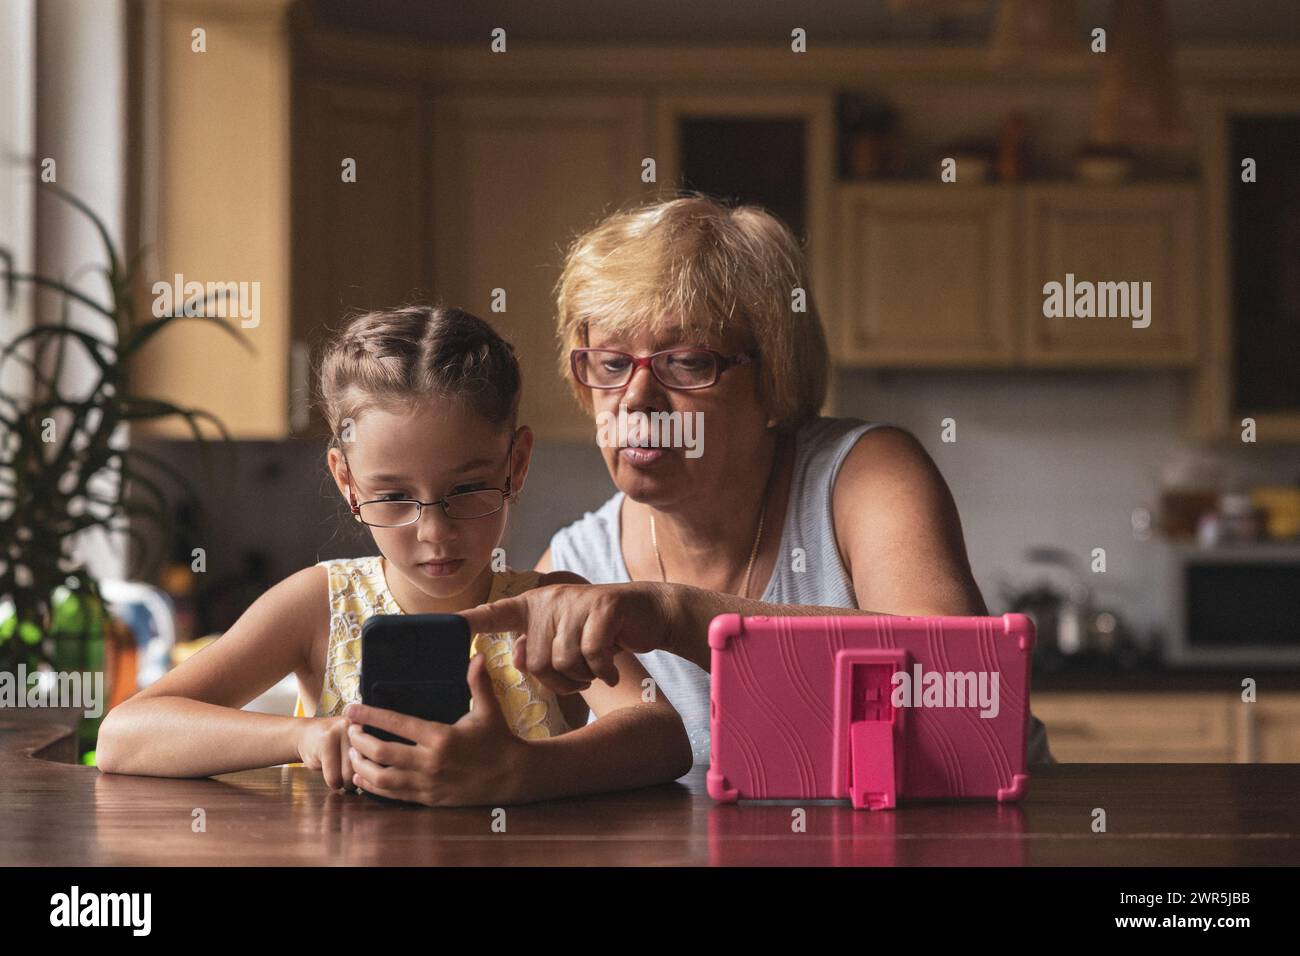 Girl and grandma with glasses sitting at the table with gadgets Stock Photo